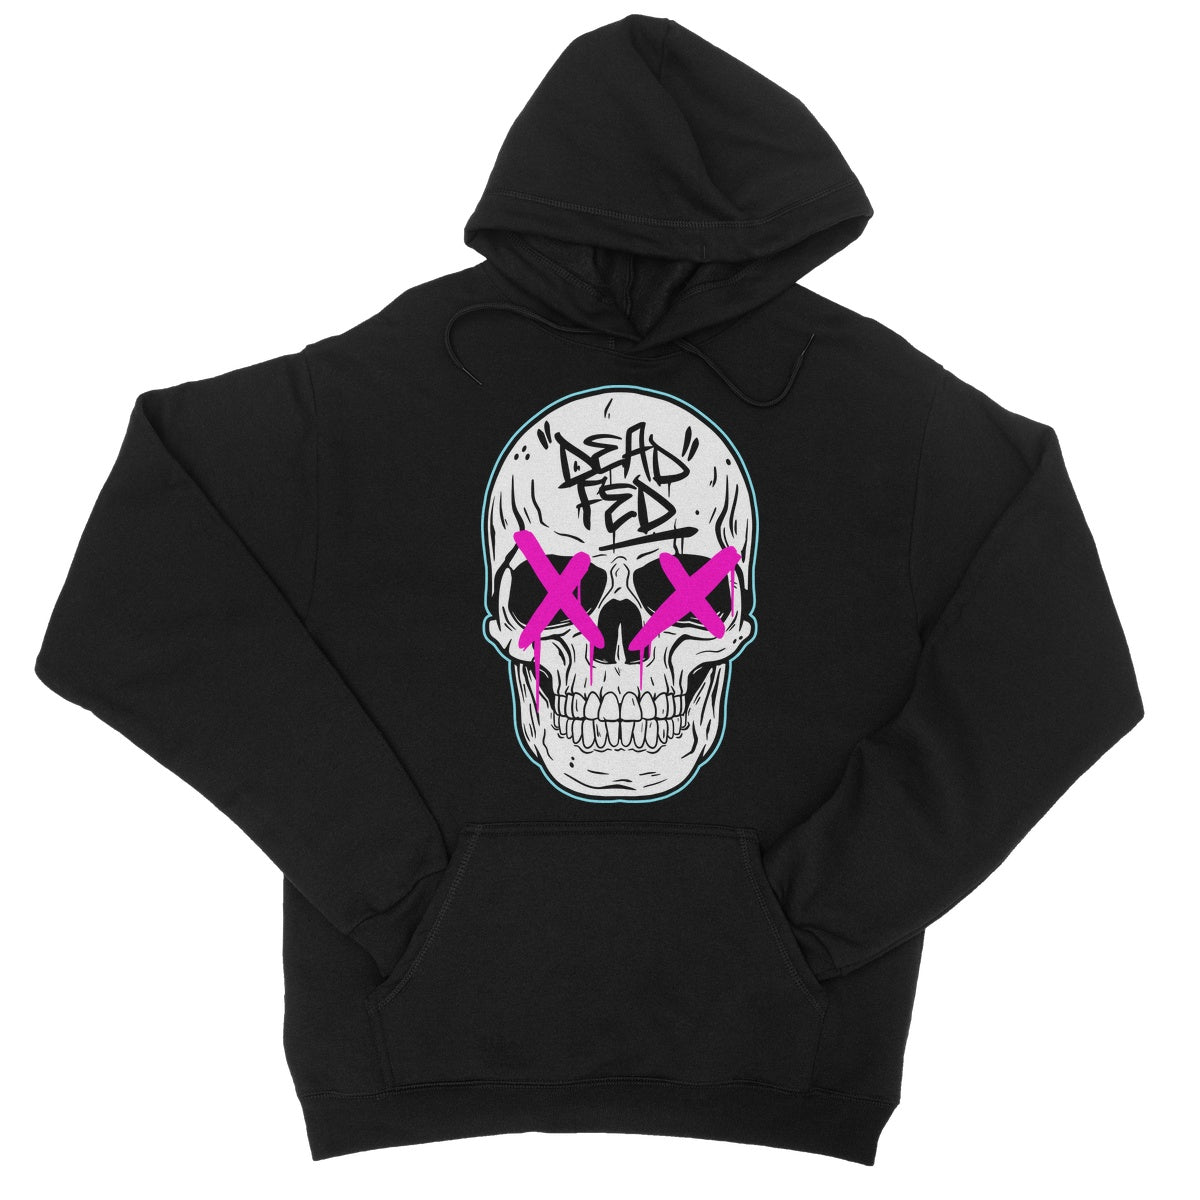 Johnny Dead Fed - White/Pink College Hoodie